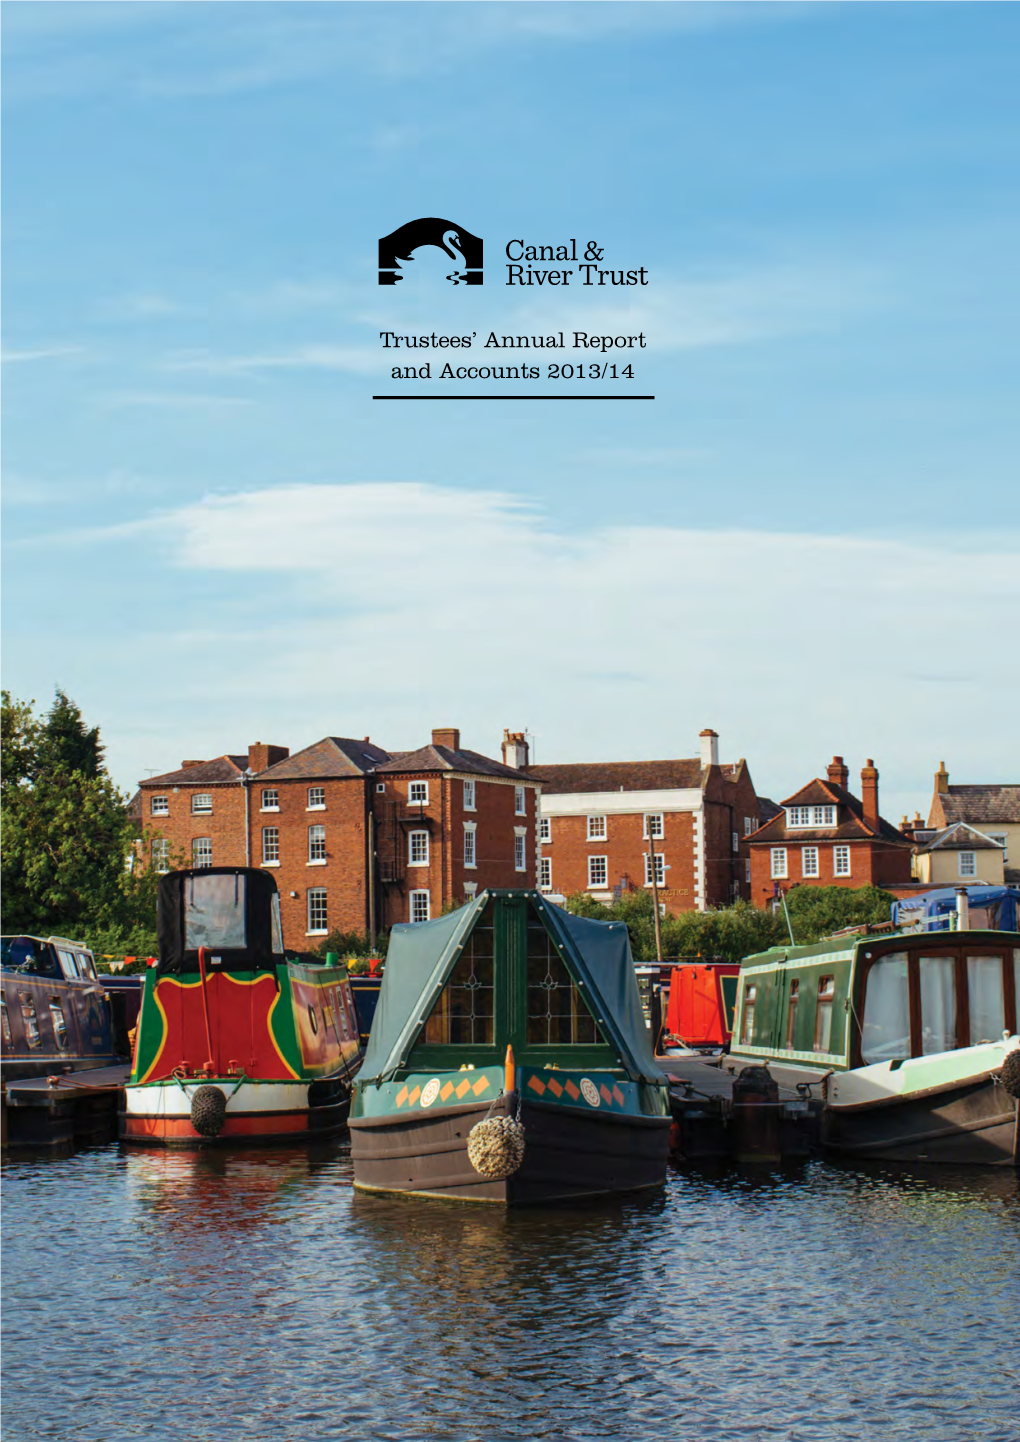 Trustees' Annual Report and Accounts 2013/14